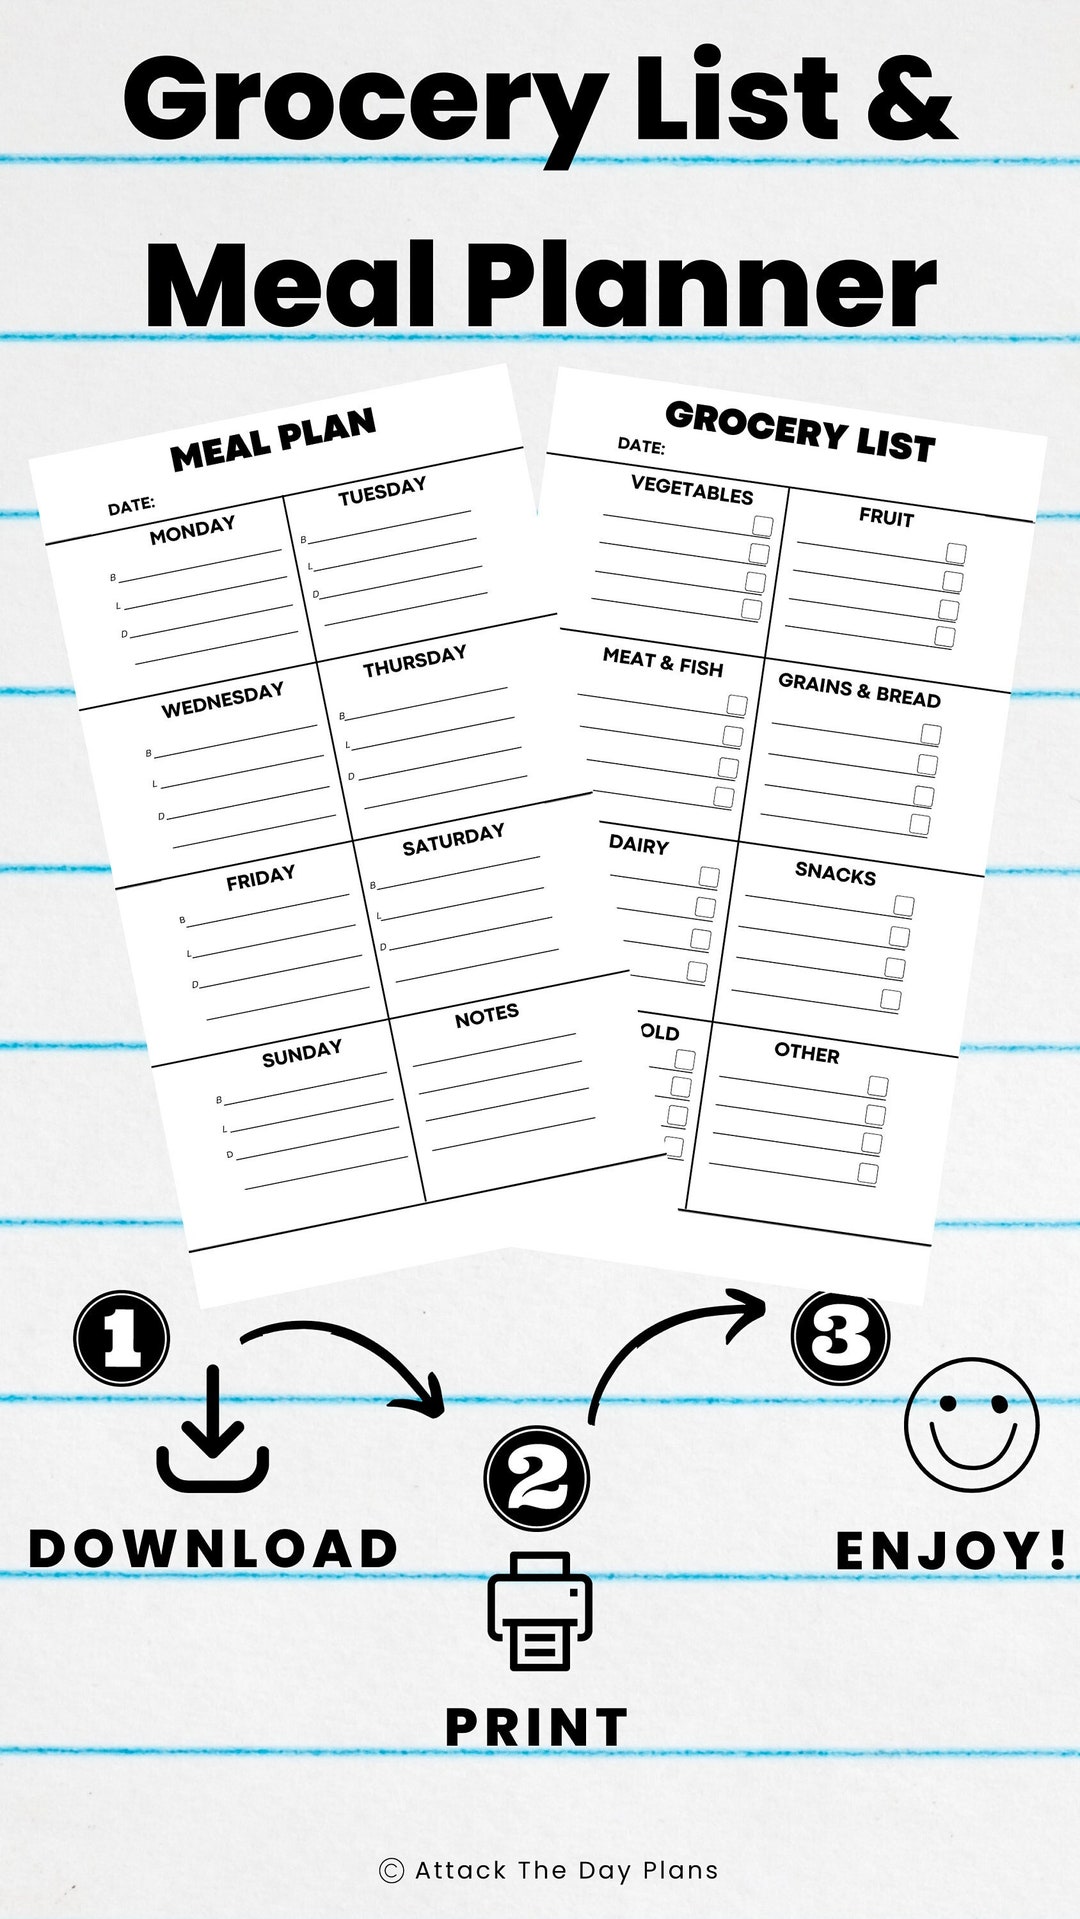 Weekly Meal Planner Grocery List Shopping List Meal Plan Healthy Eating ...